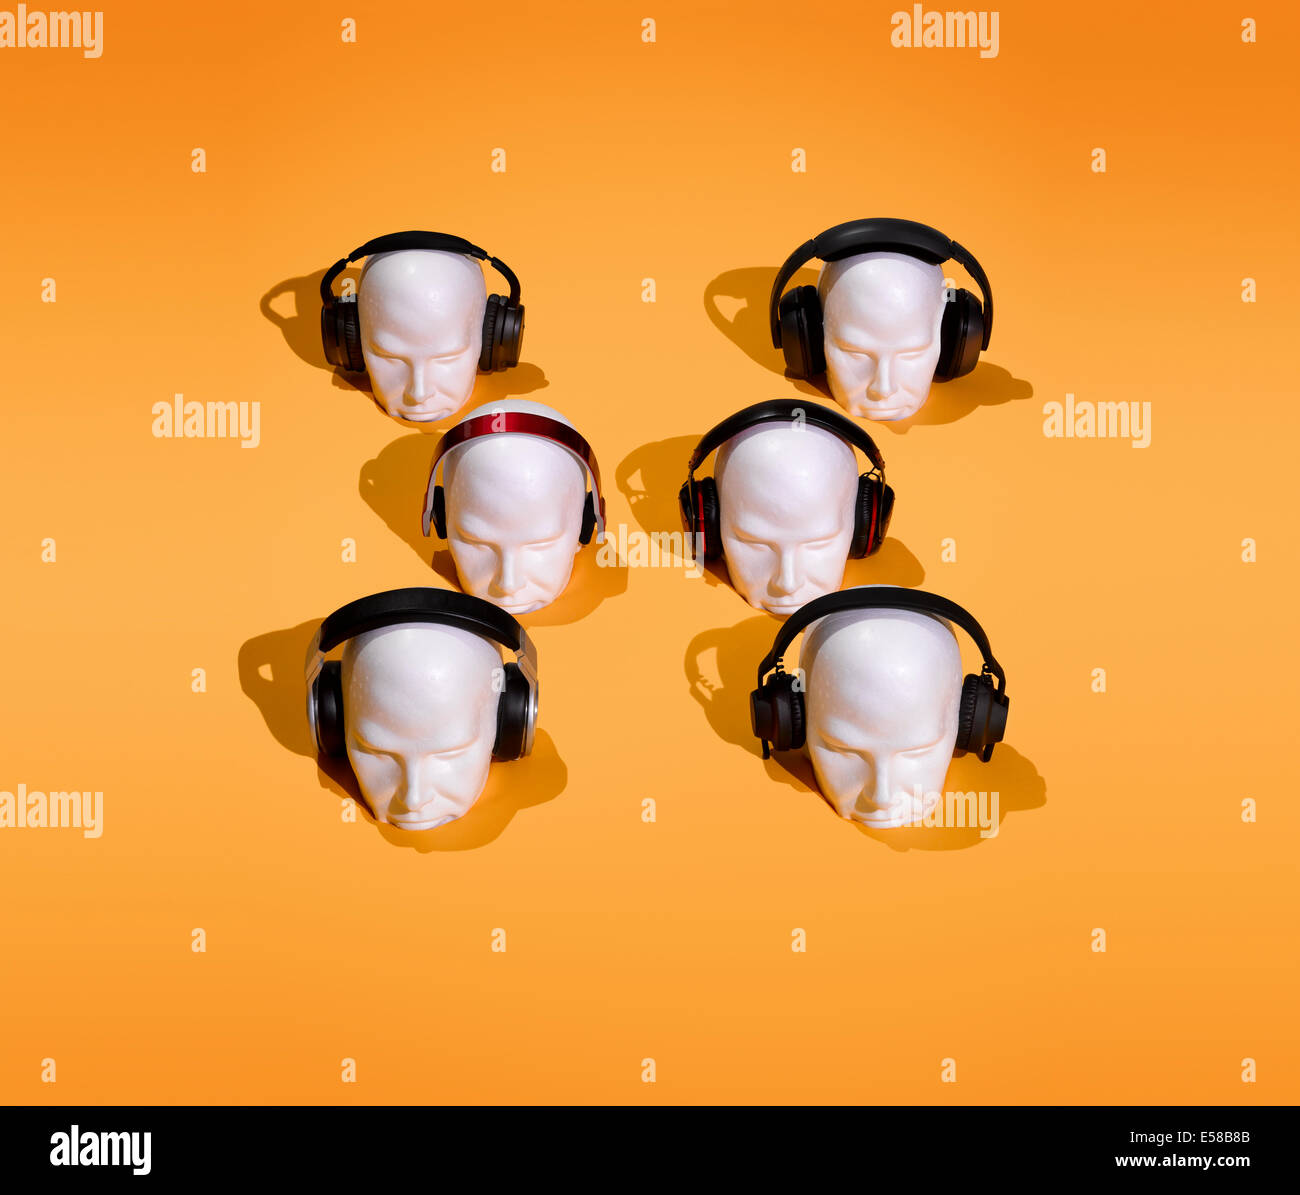 A graphic and creative way of showing a range of headphones Stock Photo